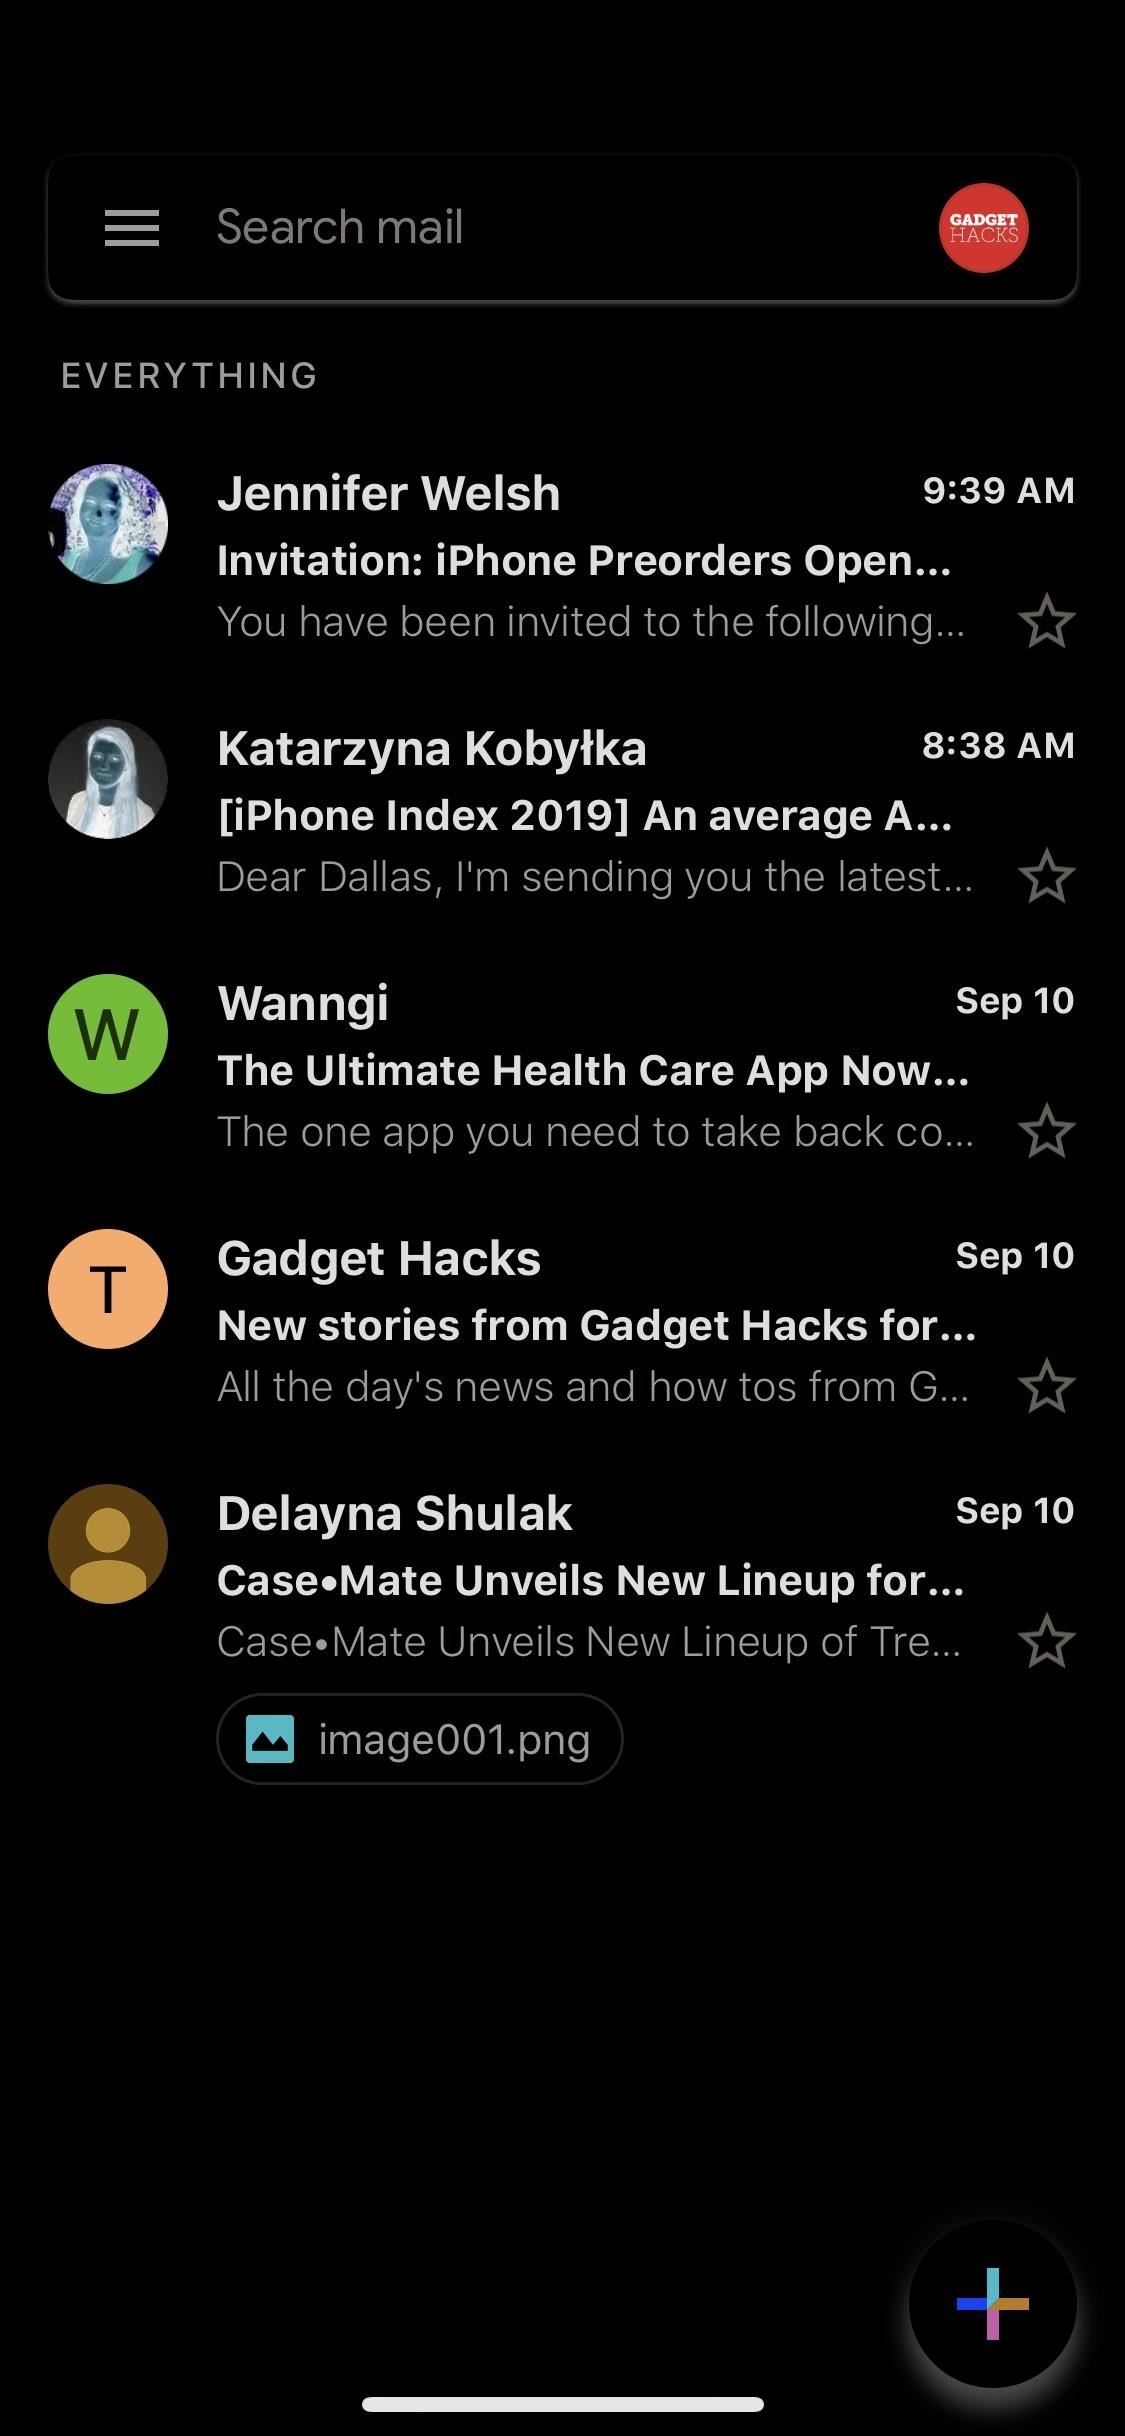 How to enable dark mode in Gmail for iPhone and Android